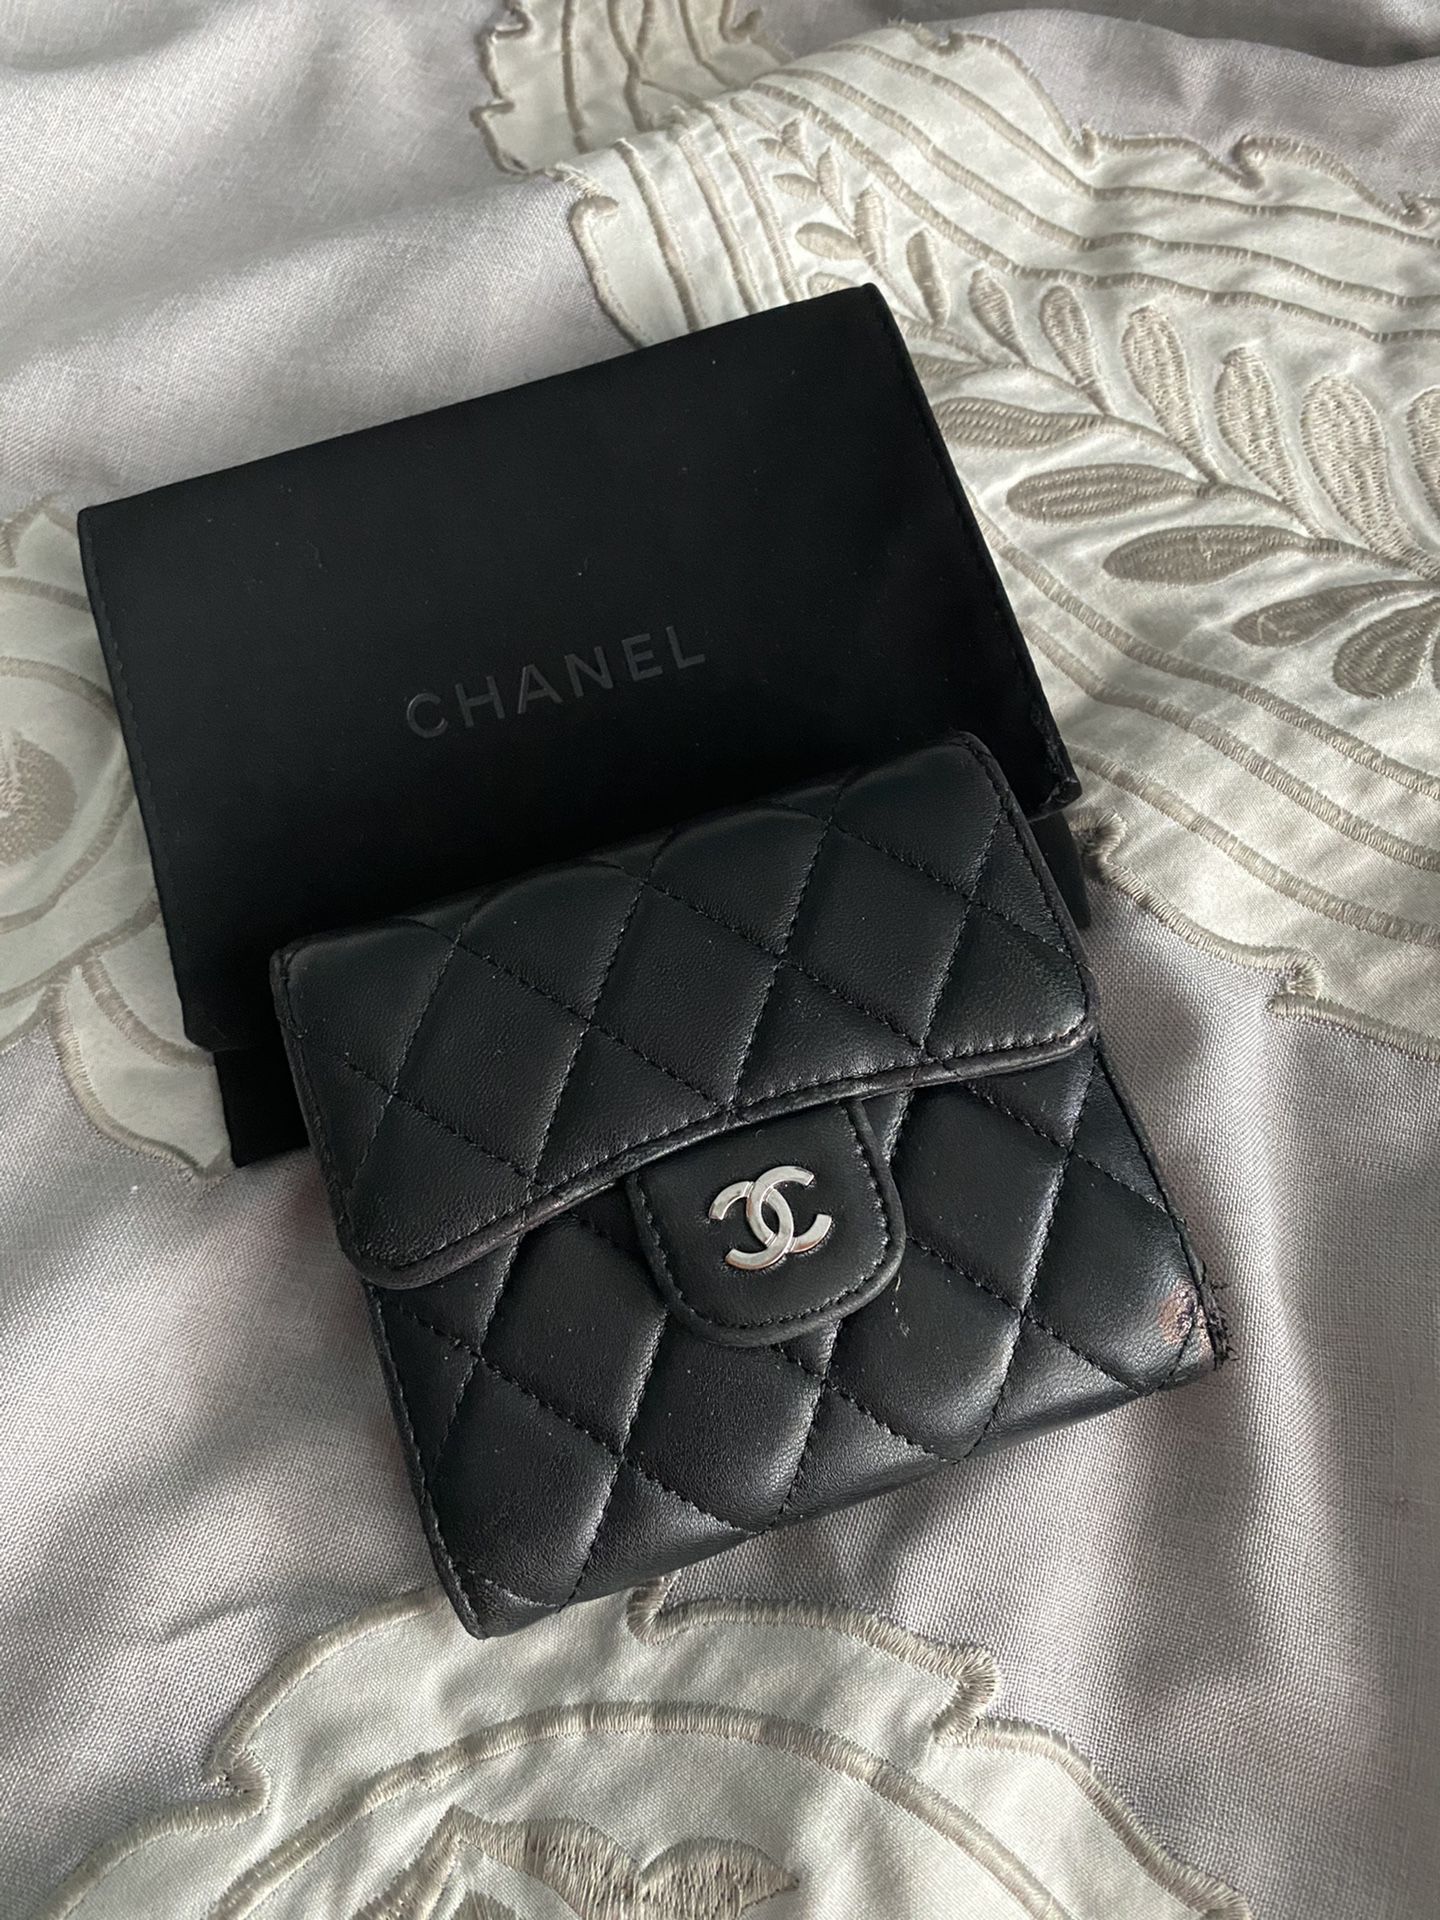 Chanel Wallet with Dust Bag